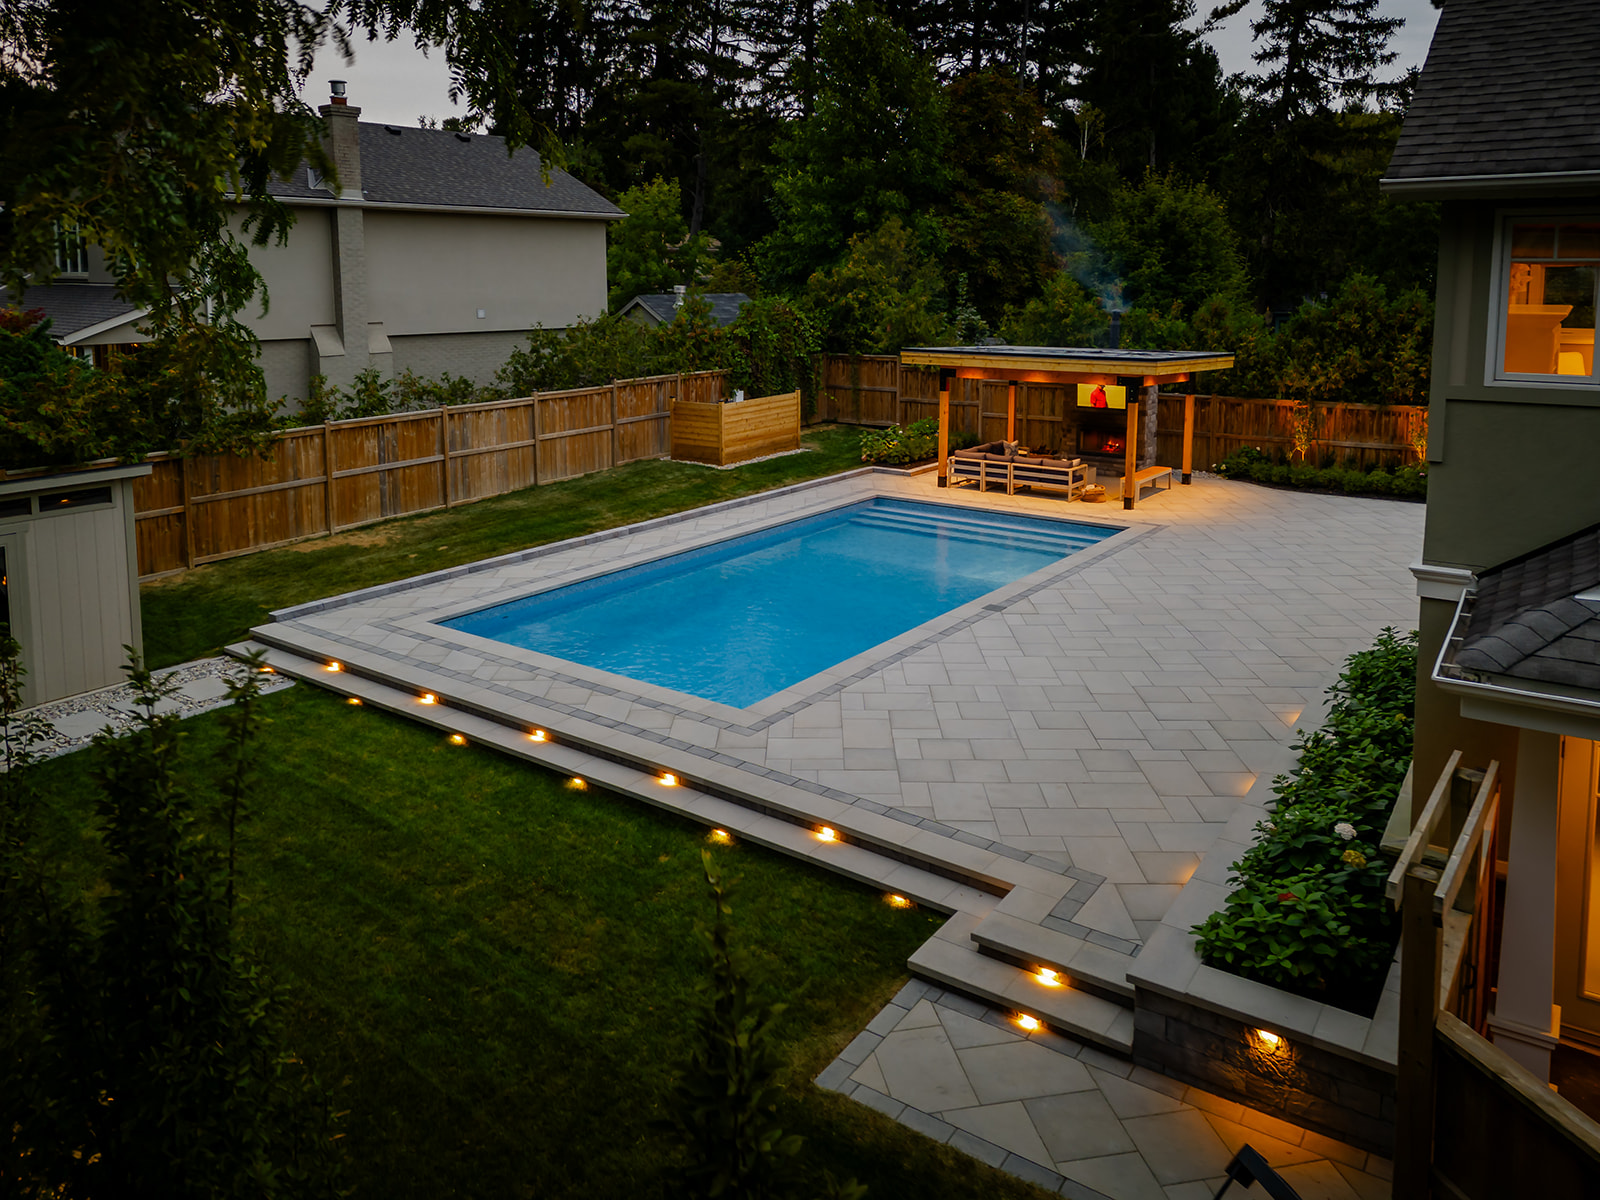 An inground pool in the backyard with a gazebo behind.